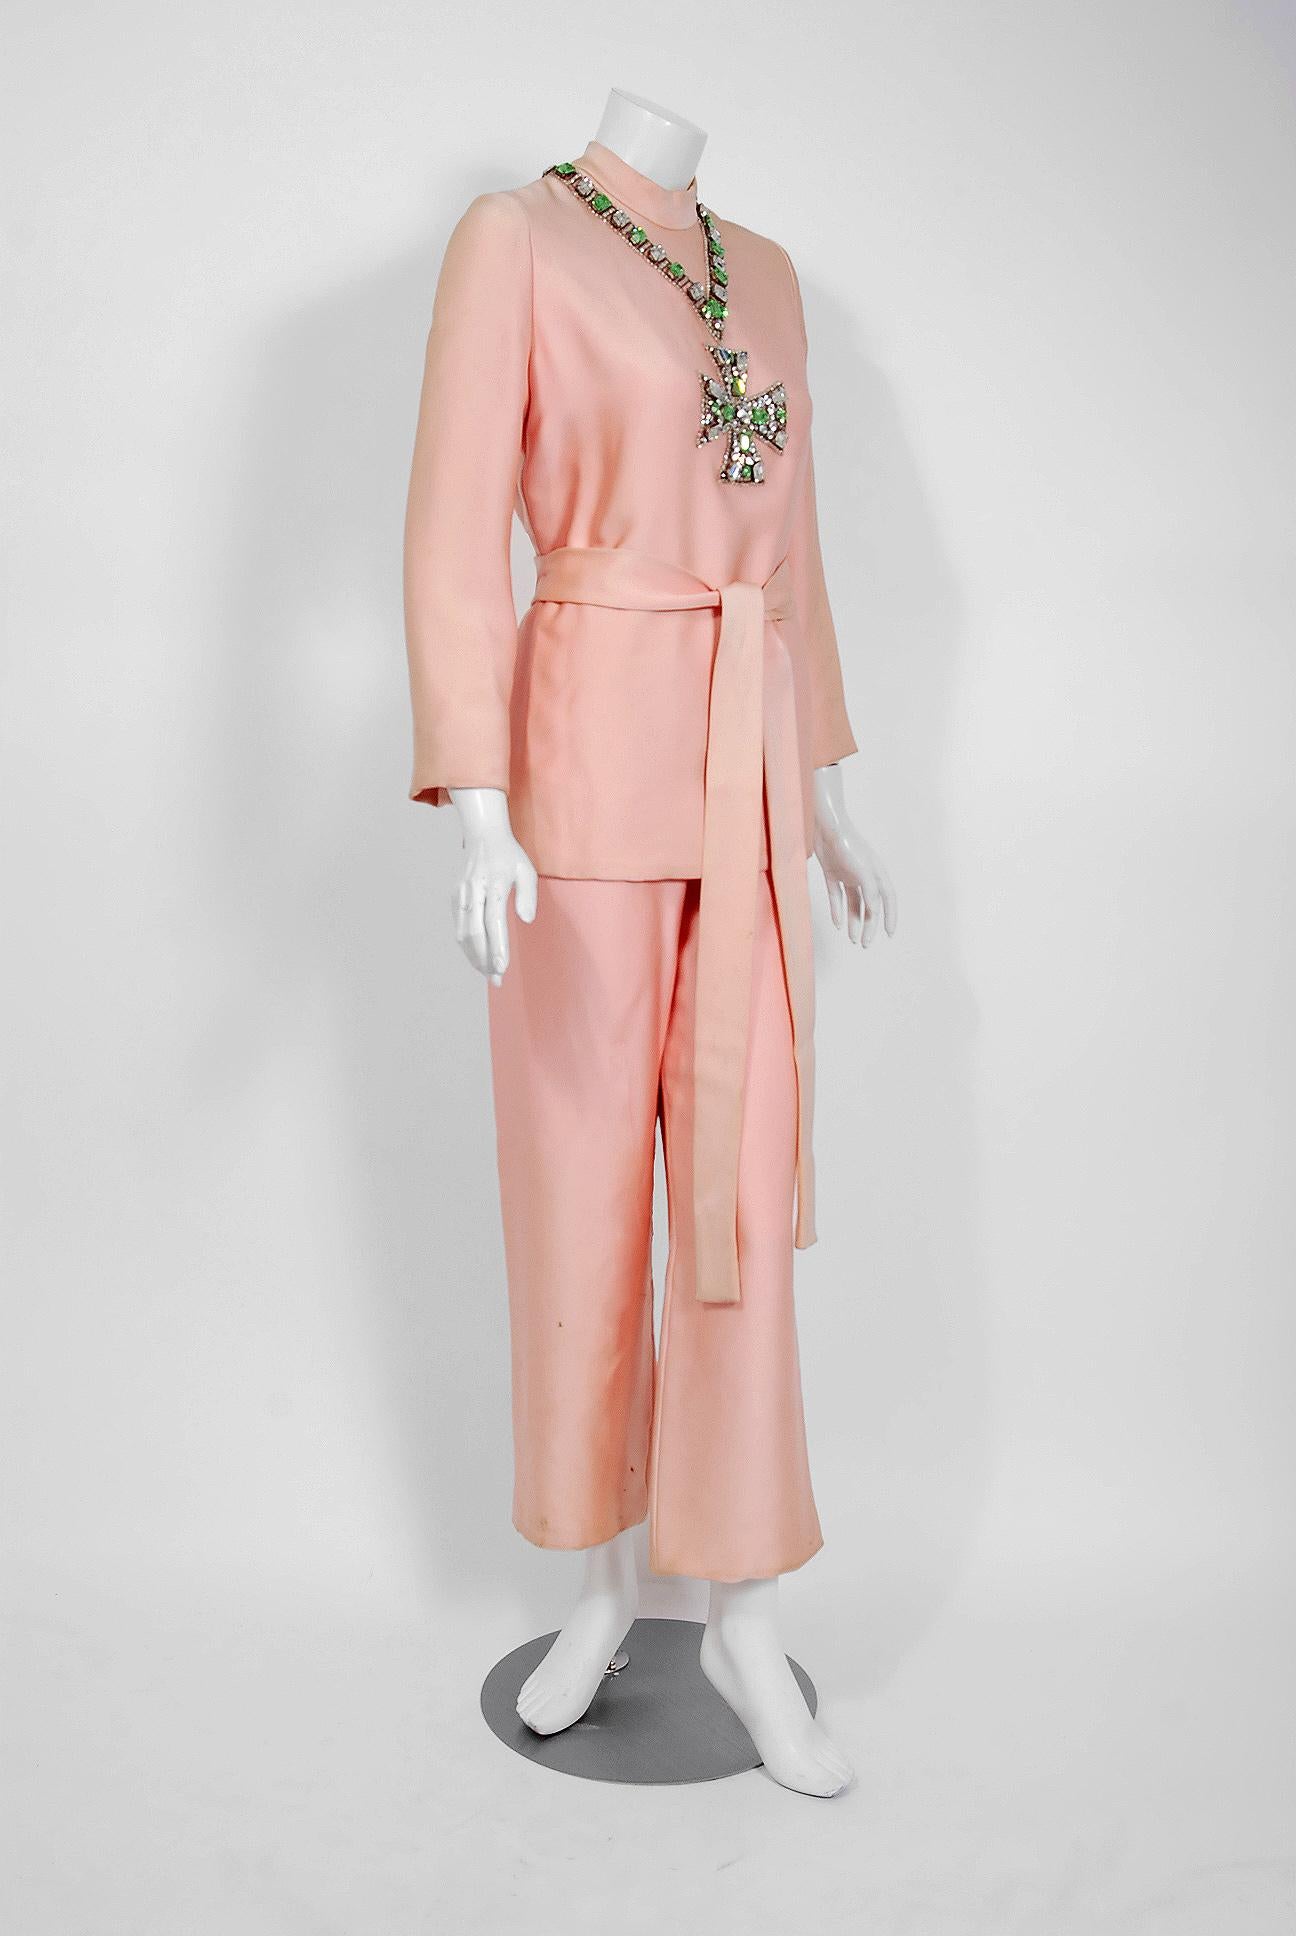 1968 Norman Norell Light-Pink Silk Jeweled Maltese Cross Belted Tunic Pantsuit  1